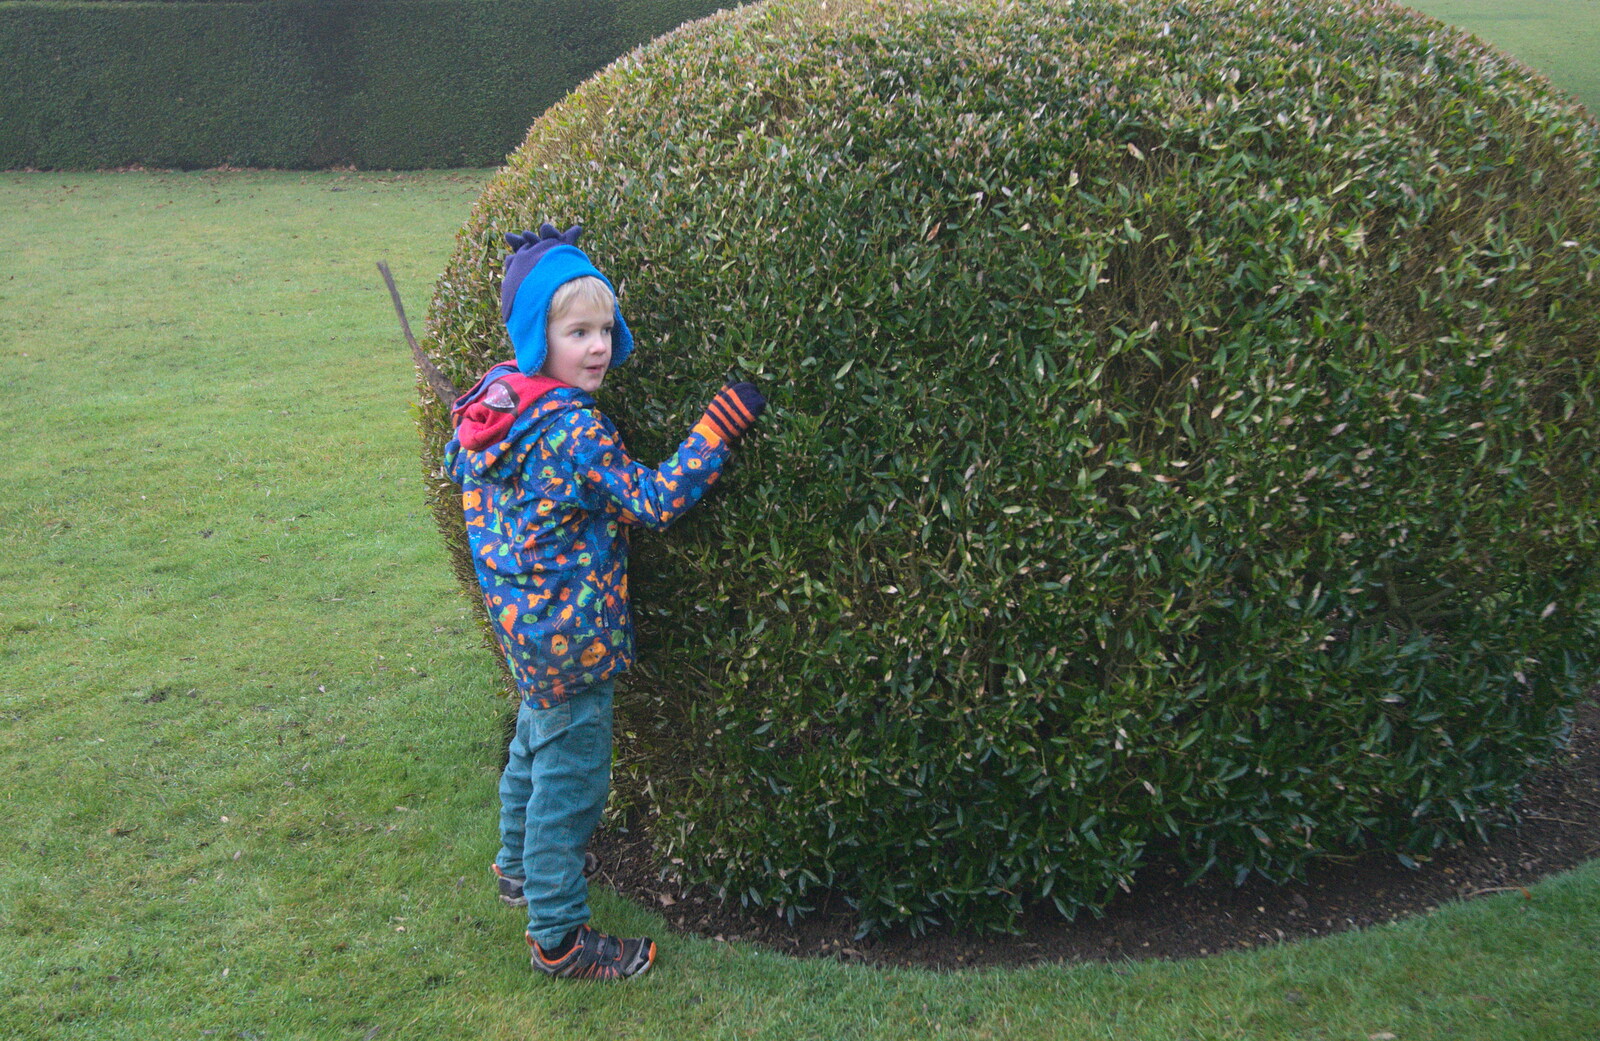 Harry hugs a hedge from A Trip to Ickworth House, Horringer, Suffolk - 30th December 2016